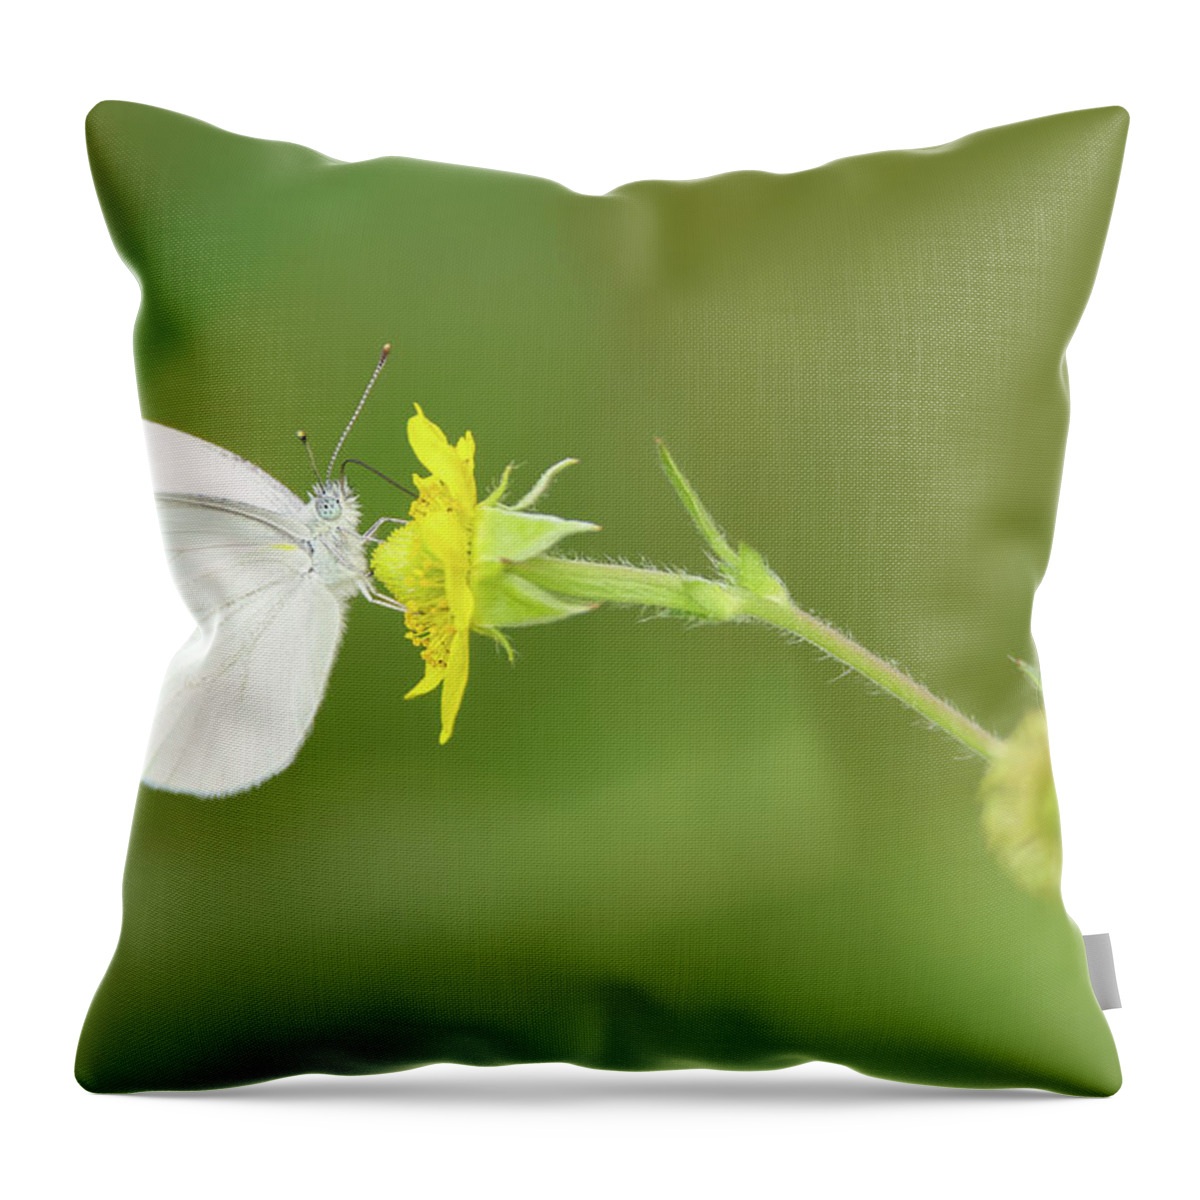 Mustard White Butterfly Throw Pillow featuring the photograph Mustard White Butterfly by Brook Burling